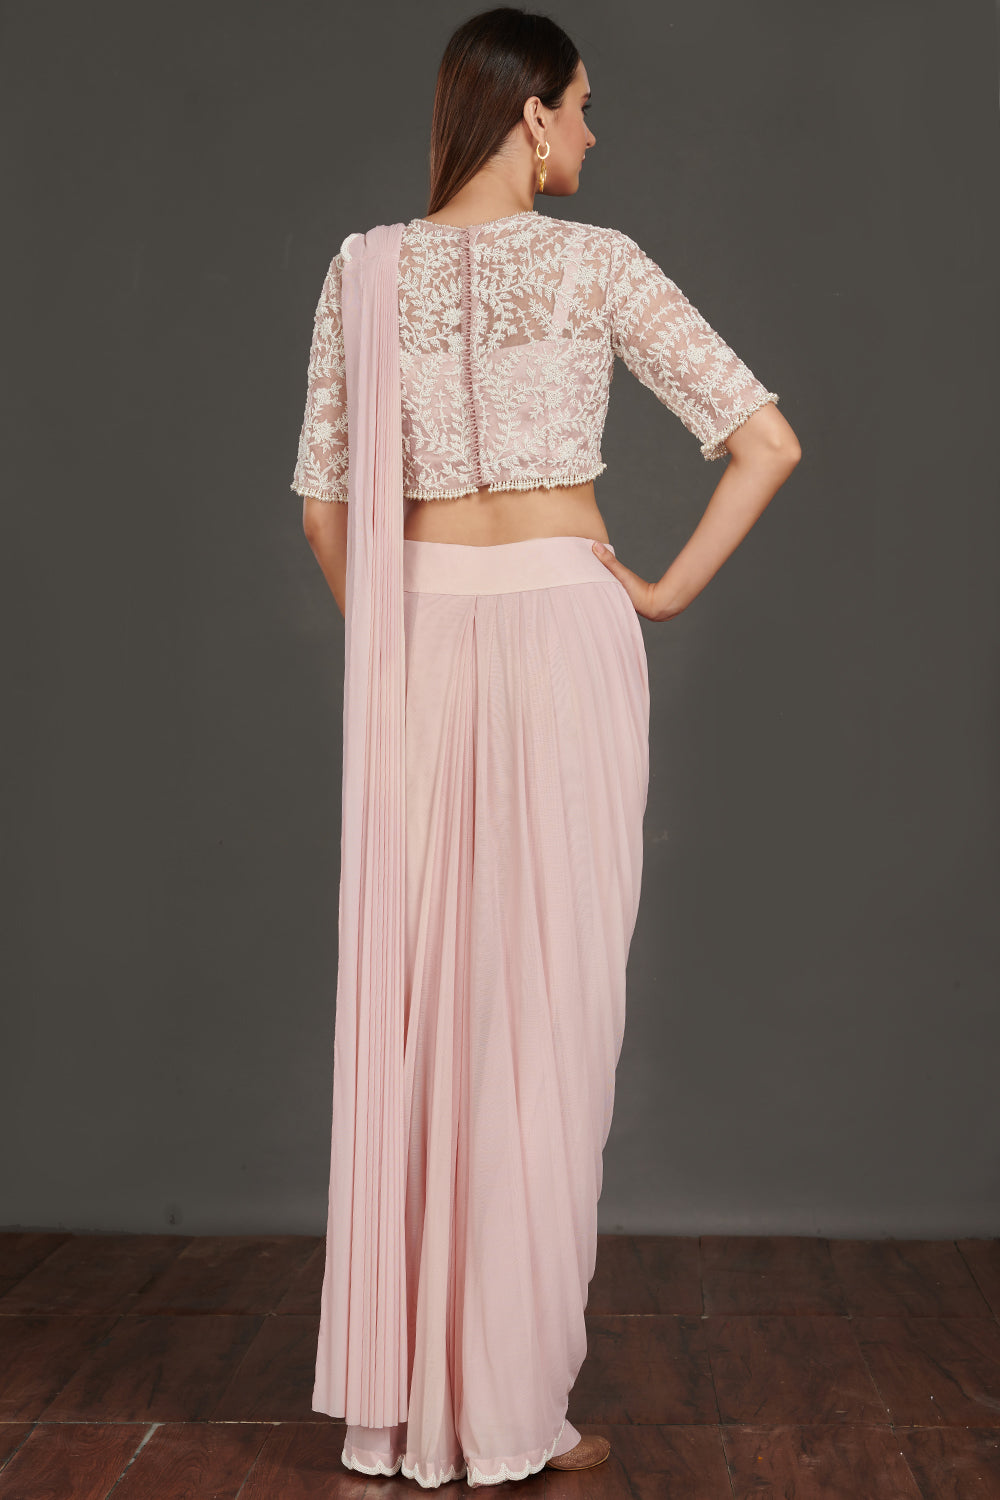 Shop pink satin drape with a designer white laced blouse. Make a fashion statement on festive occasions and weddings with designer sarees, designer suits, Indian dresses, Anarkali suits, palazzo suits, designer gowns, sharara suits, and embroidered sarees from Pure Elegance Indian fashion store in the USA.